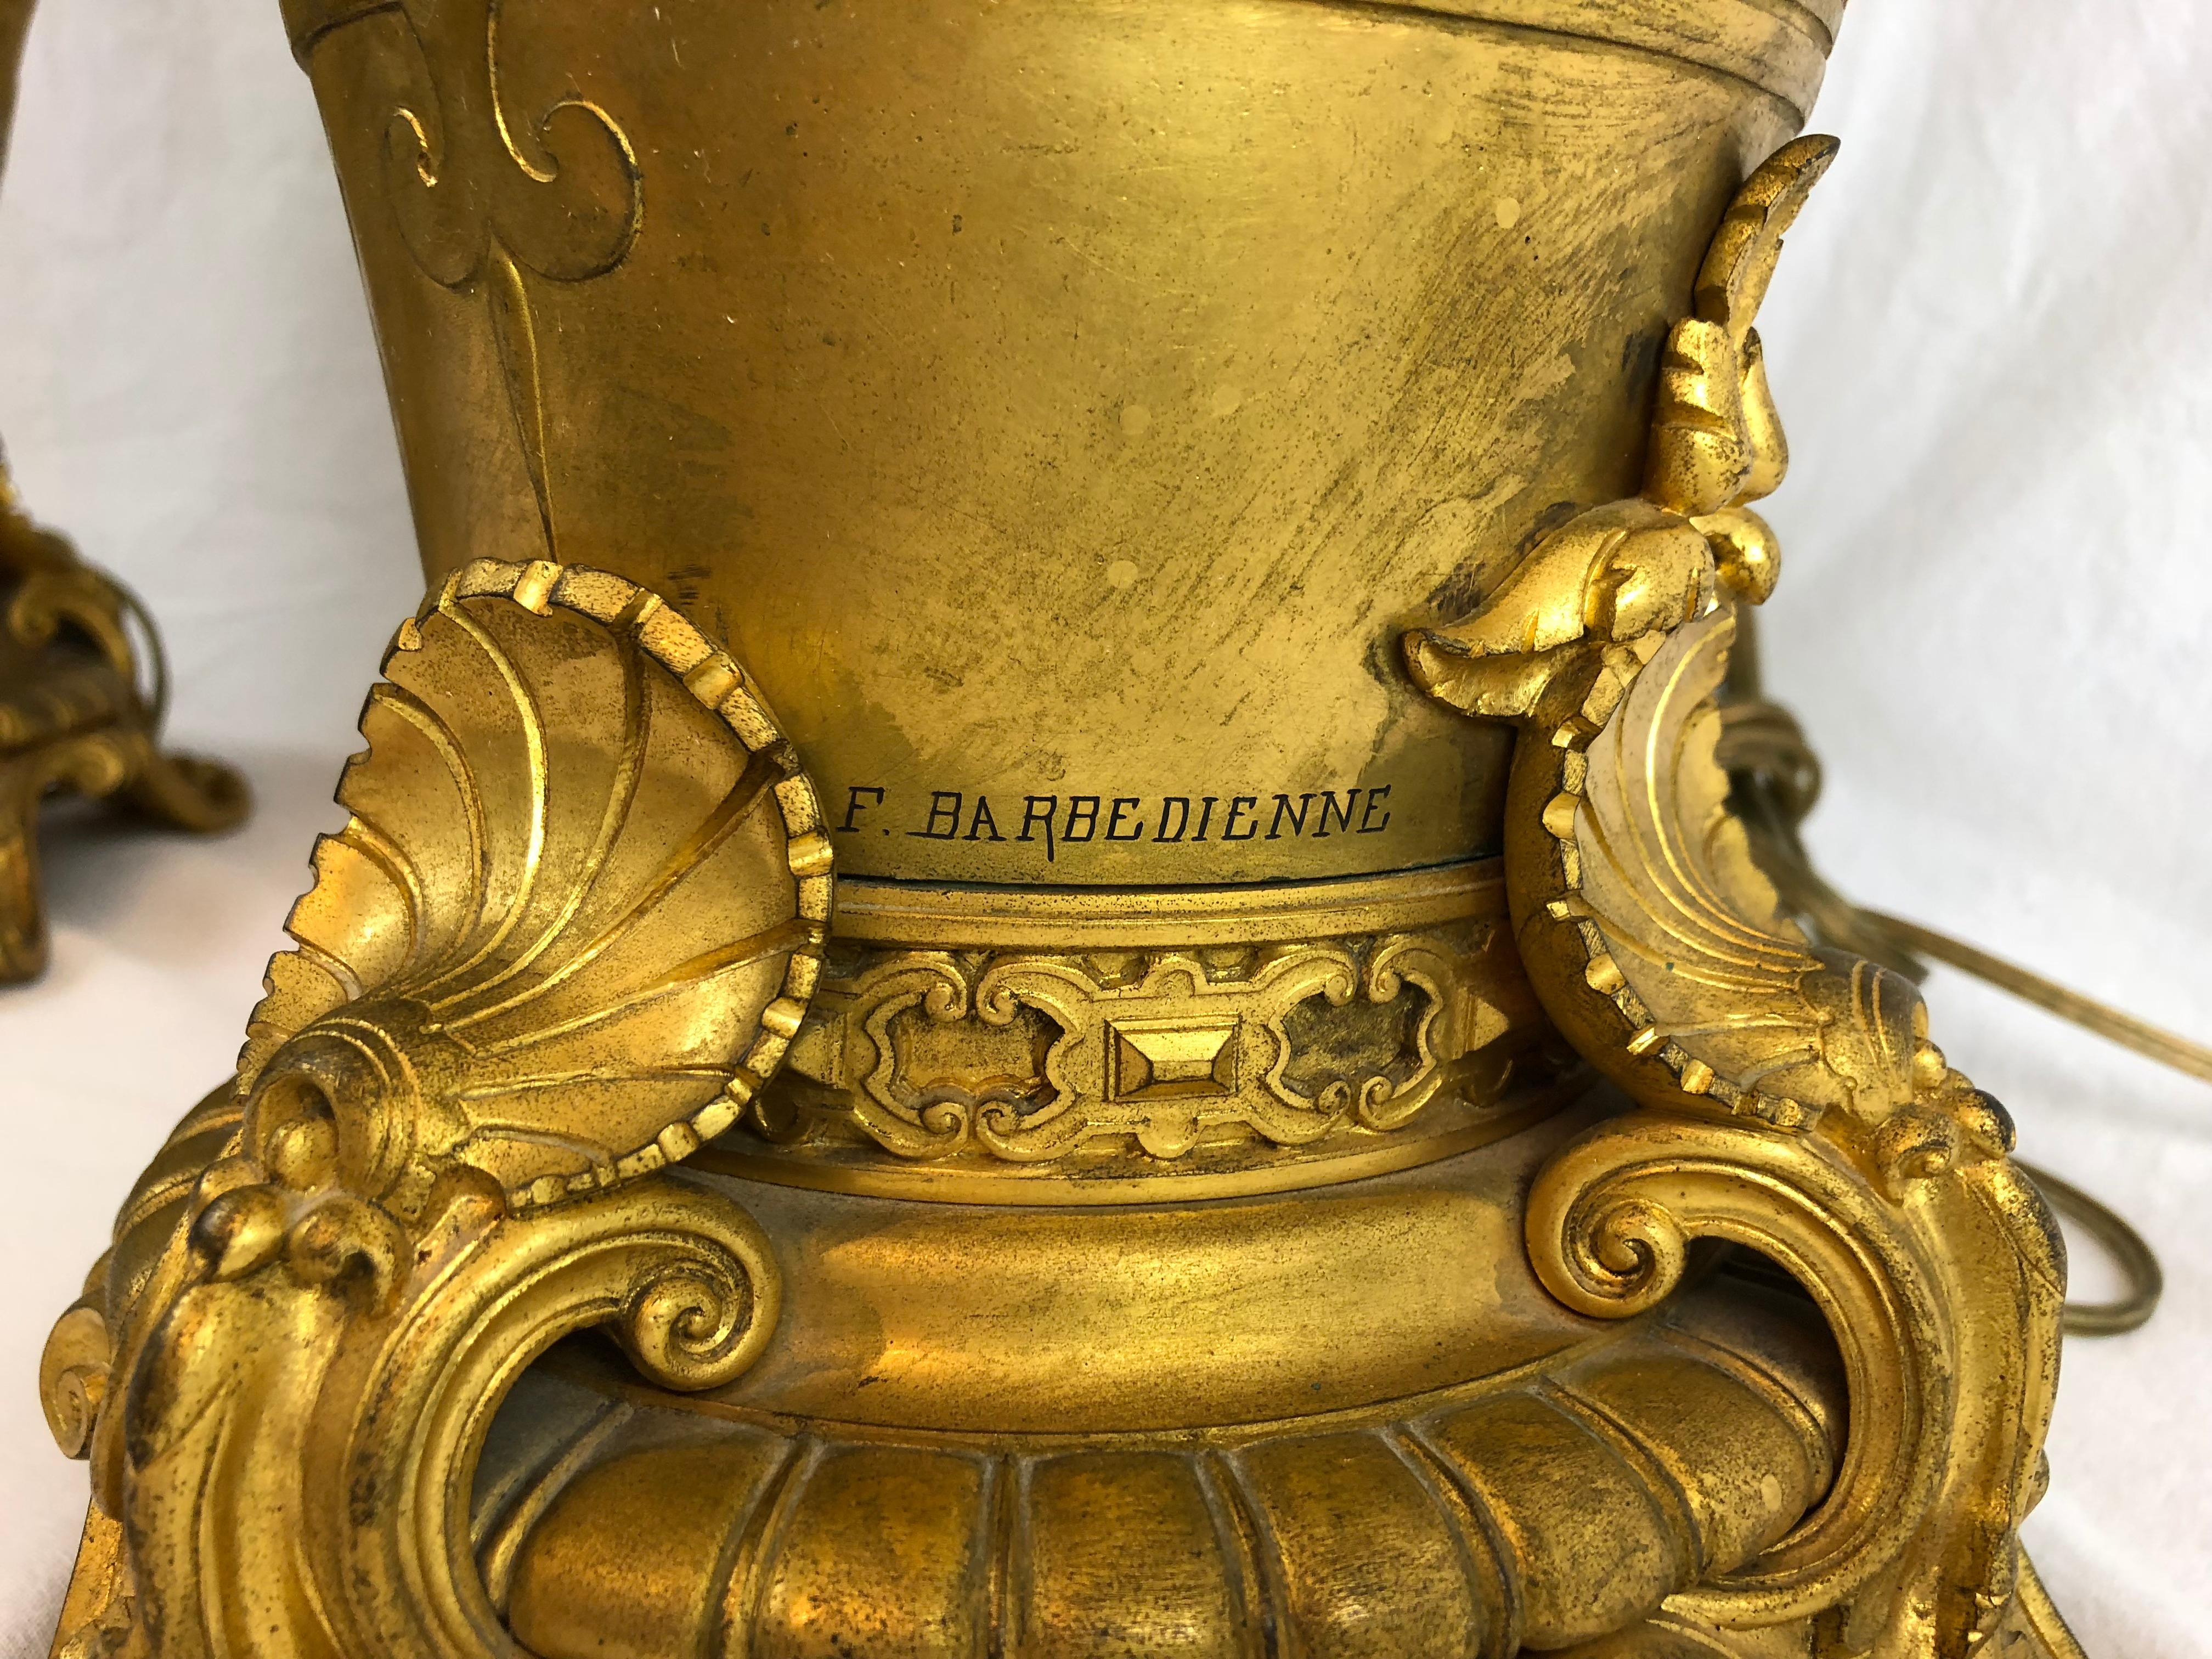 Large pair of F. Barbedienne signed urns in gilt bronze. Mounted as lamps

Third quarter 19th century 

Each urn is 23.5